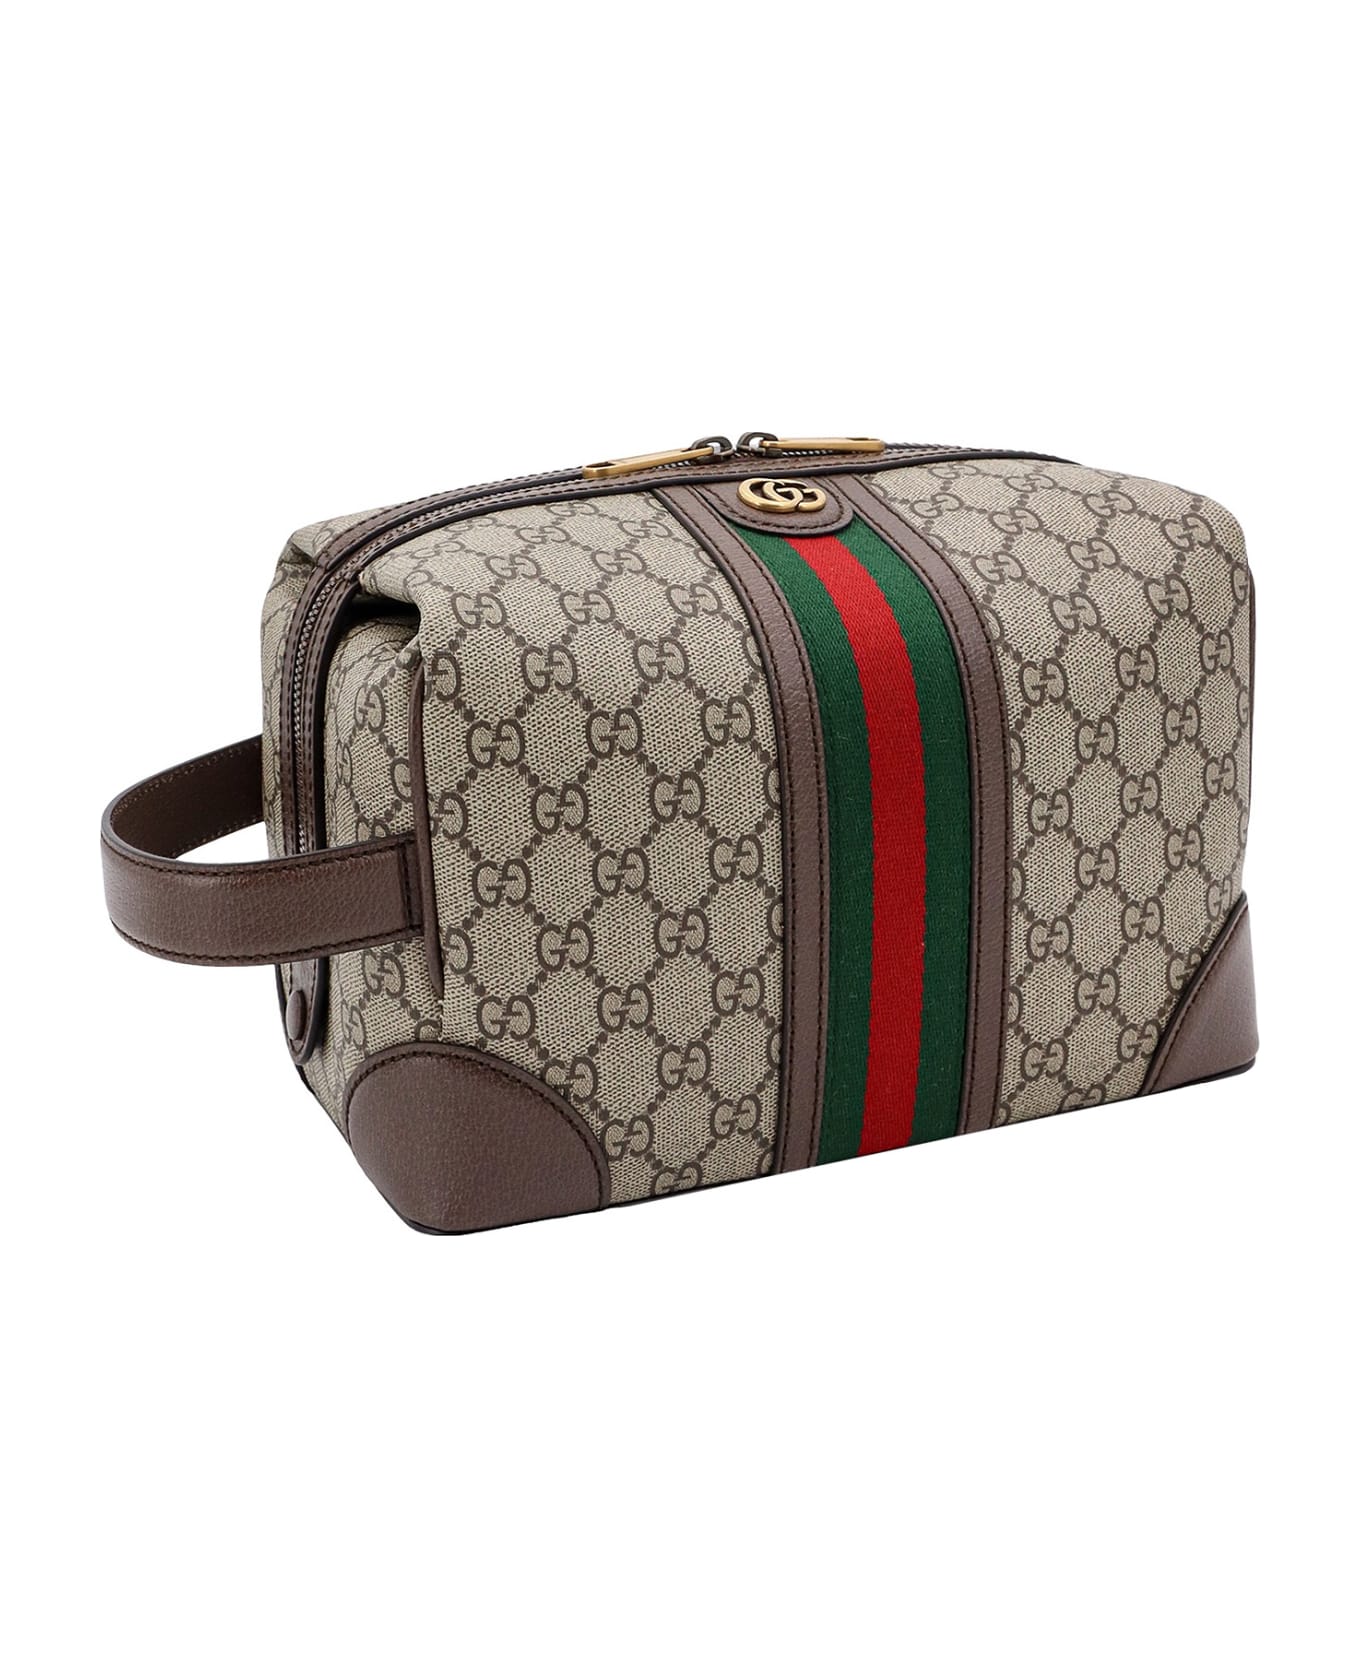 Gucci Savoy Beauty Case - Brown